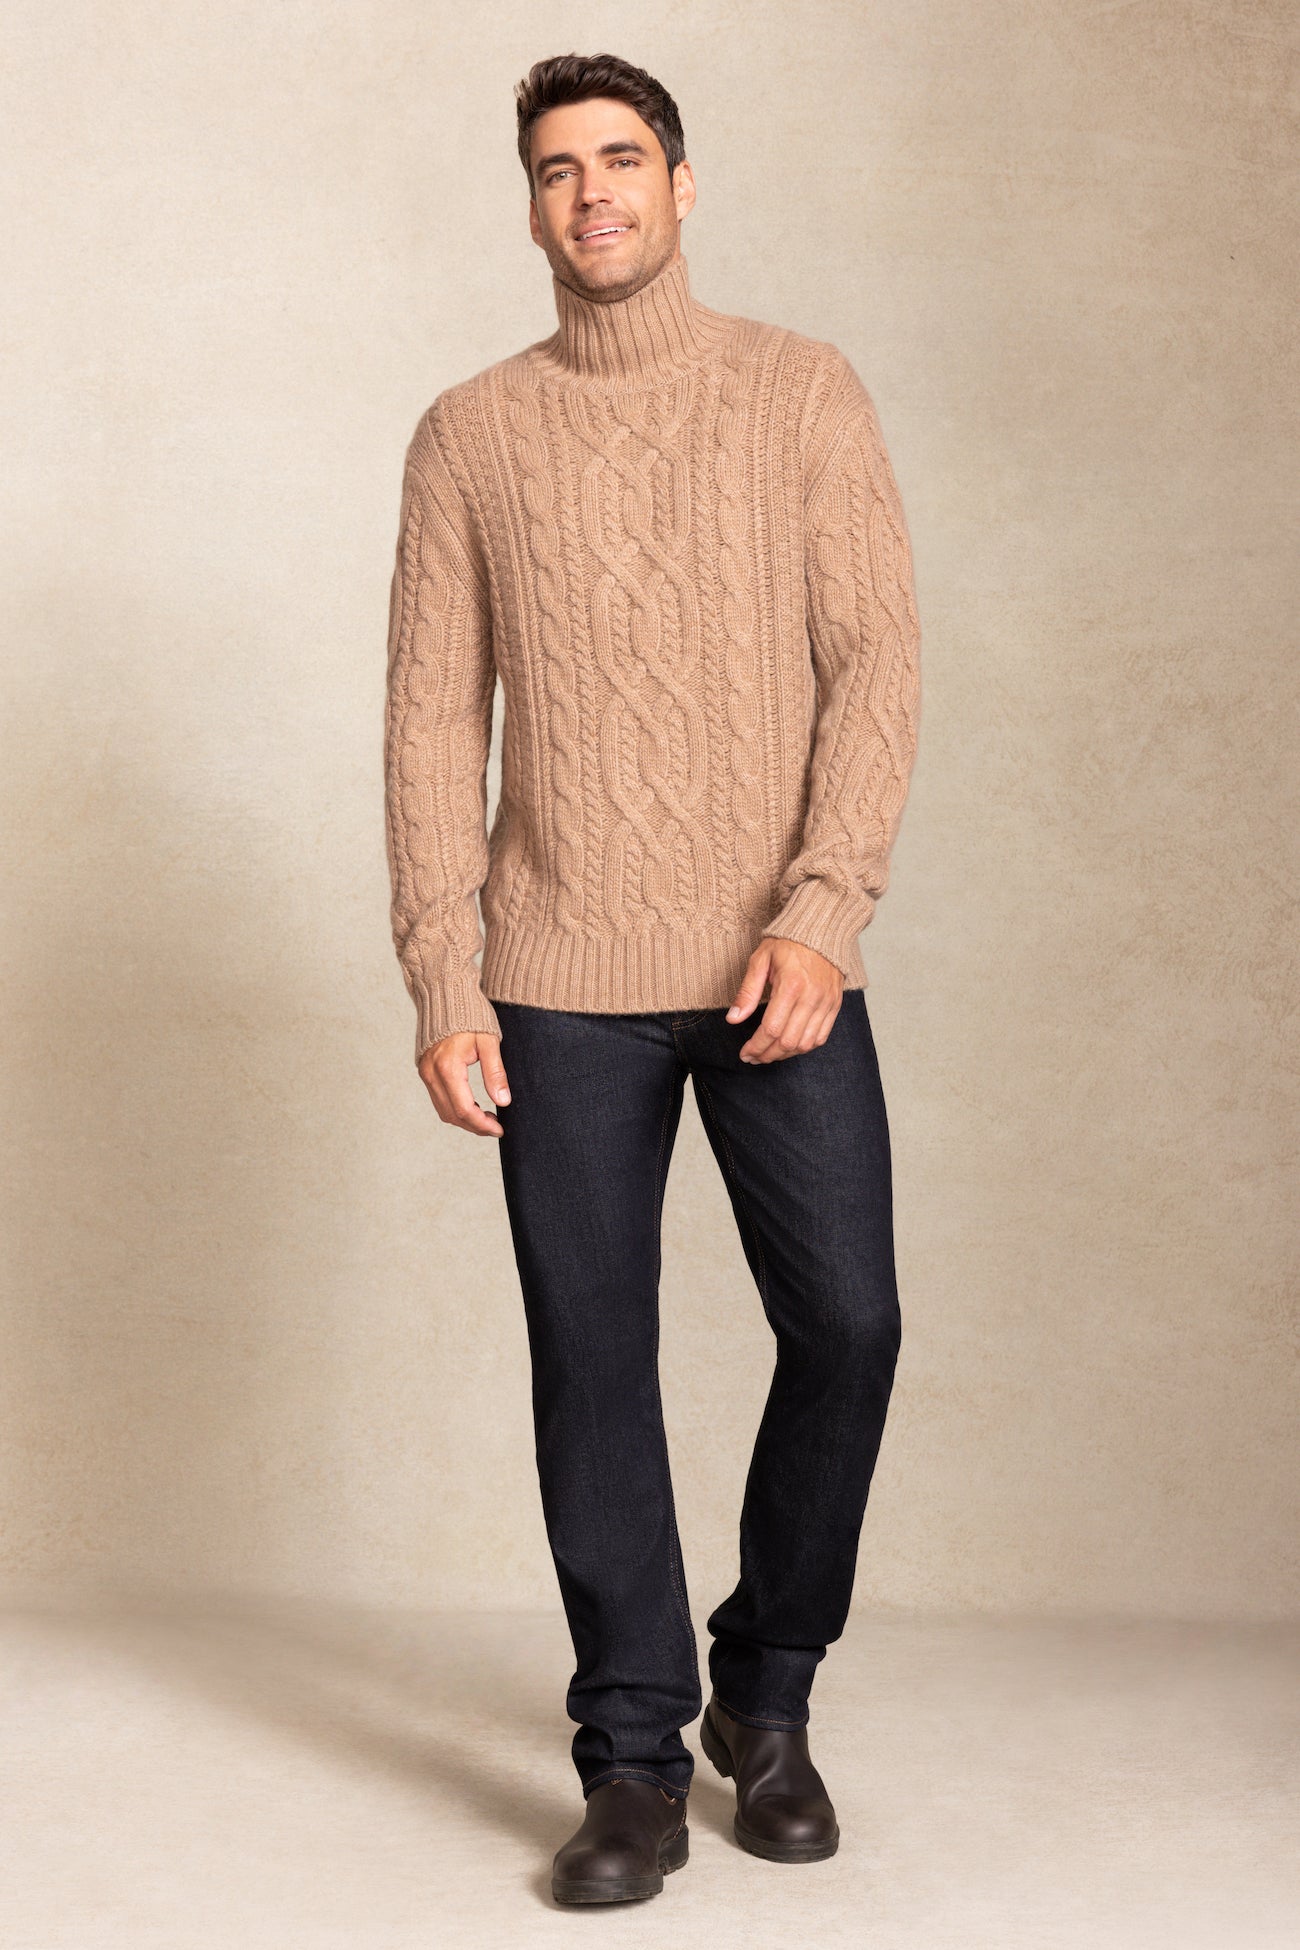 Cashmere outfits for men